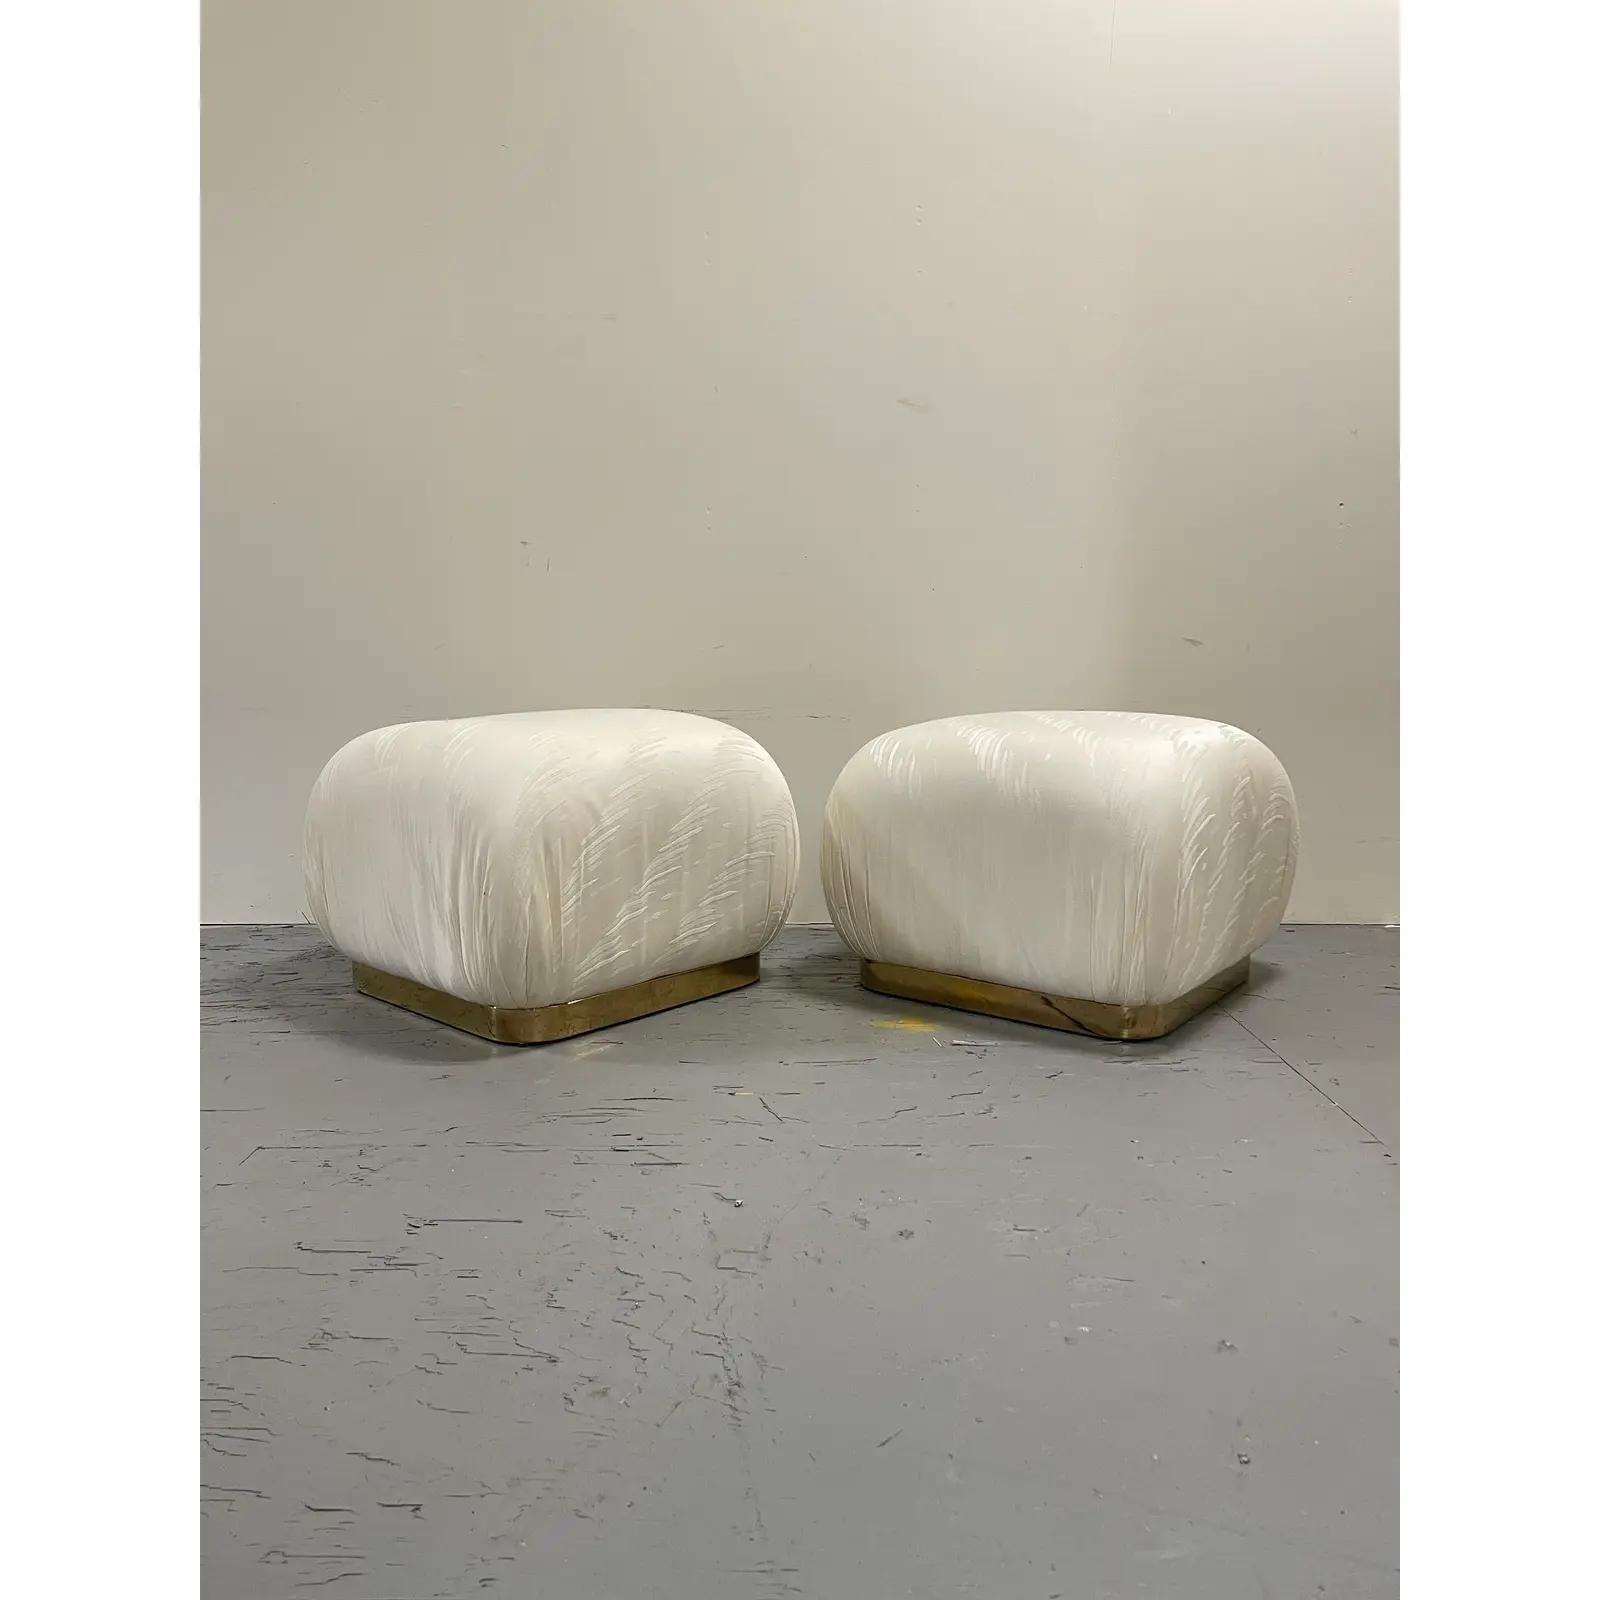 Vintage pair of brass base souffle ottomans in the manner of Karl Springer. Timeless design offers versatile use as ottoman or additional seating.
Curbside to NYC/Philly $350